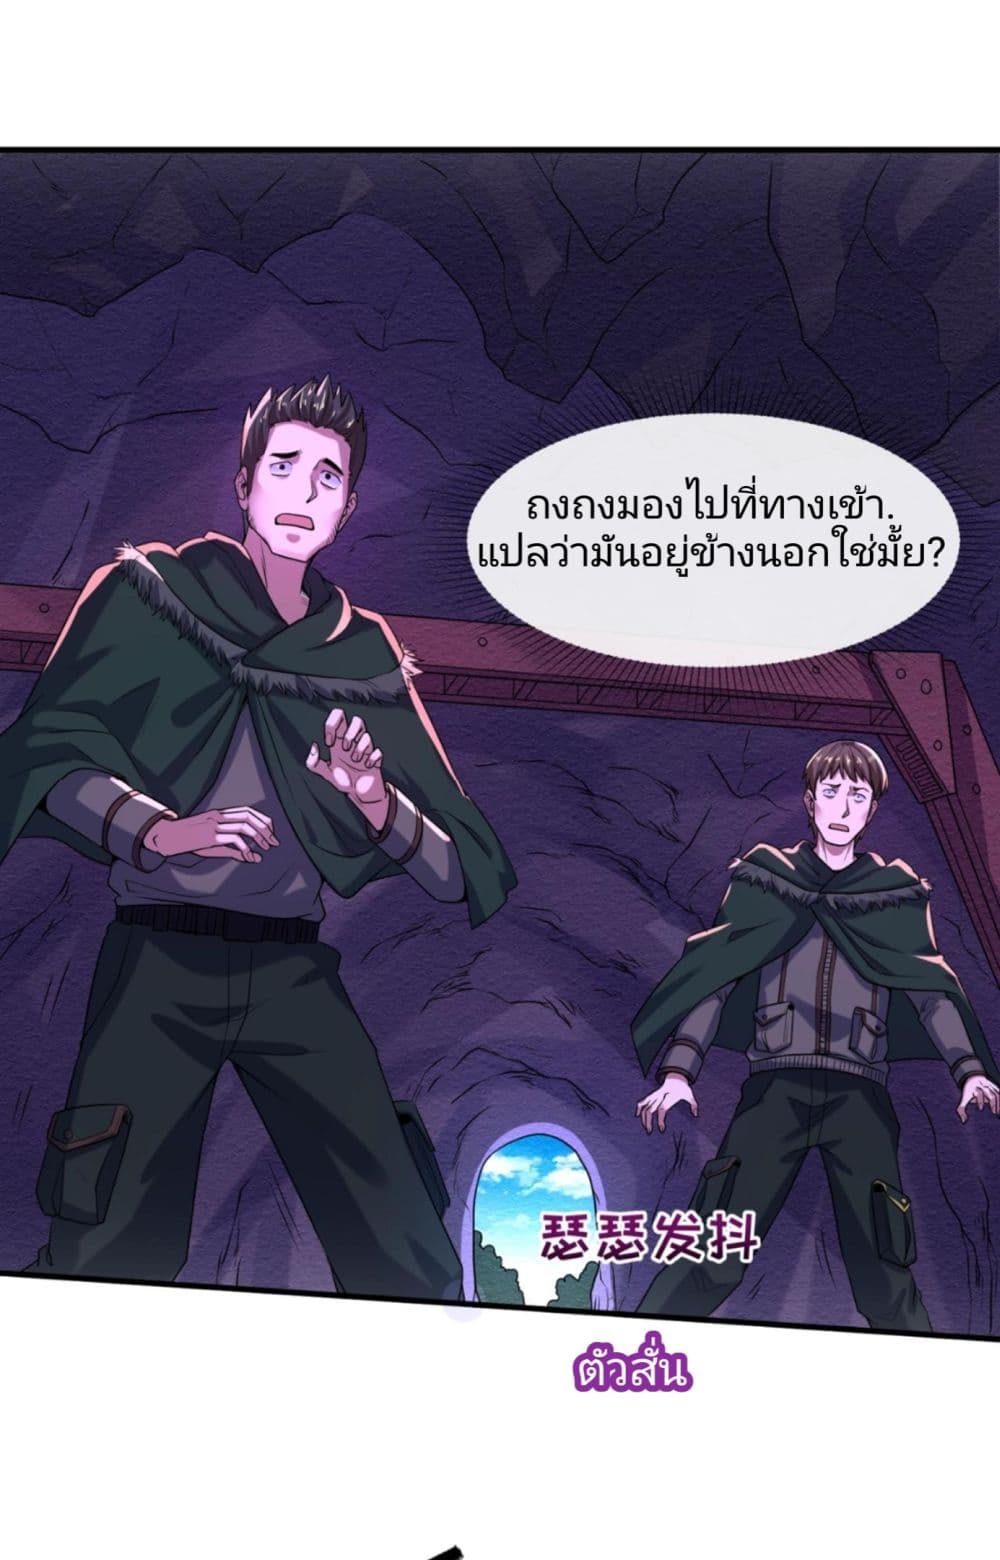 The Age of Ghost Spirits à¸à¸­à¸à¸à¸µà¹ 6 (45)